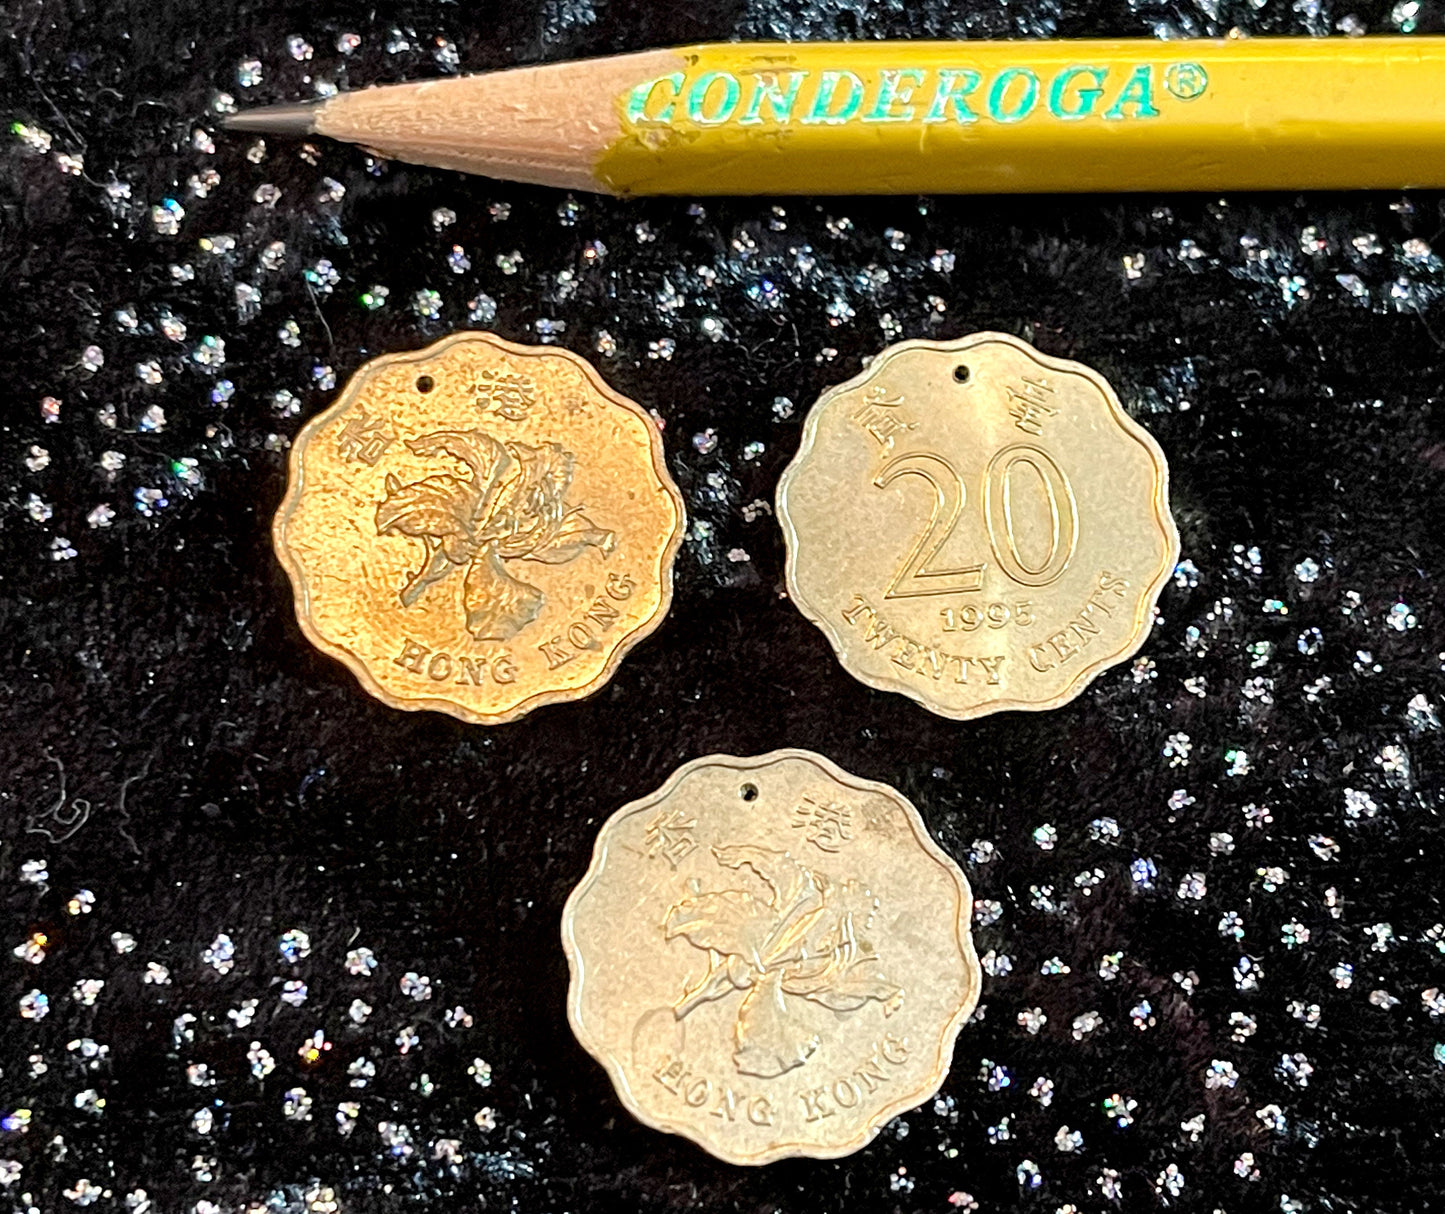 Bauhinia Orchid 20 Cent Hong Kong Authentic Coin Money for Jewelry and Craft Making